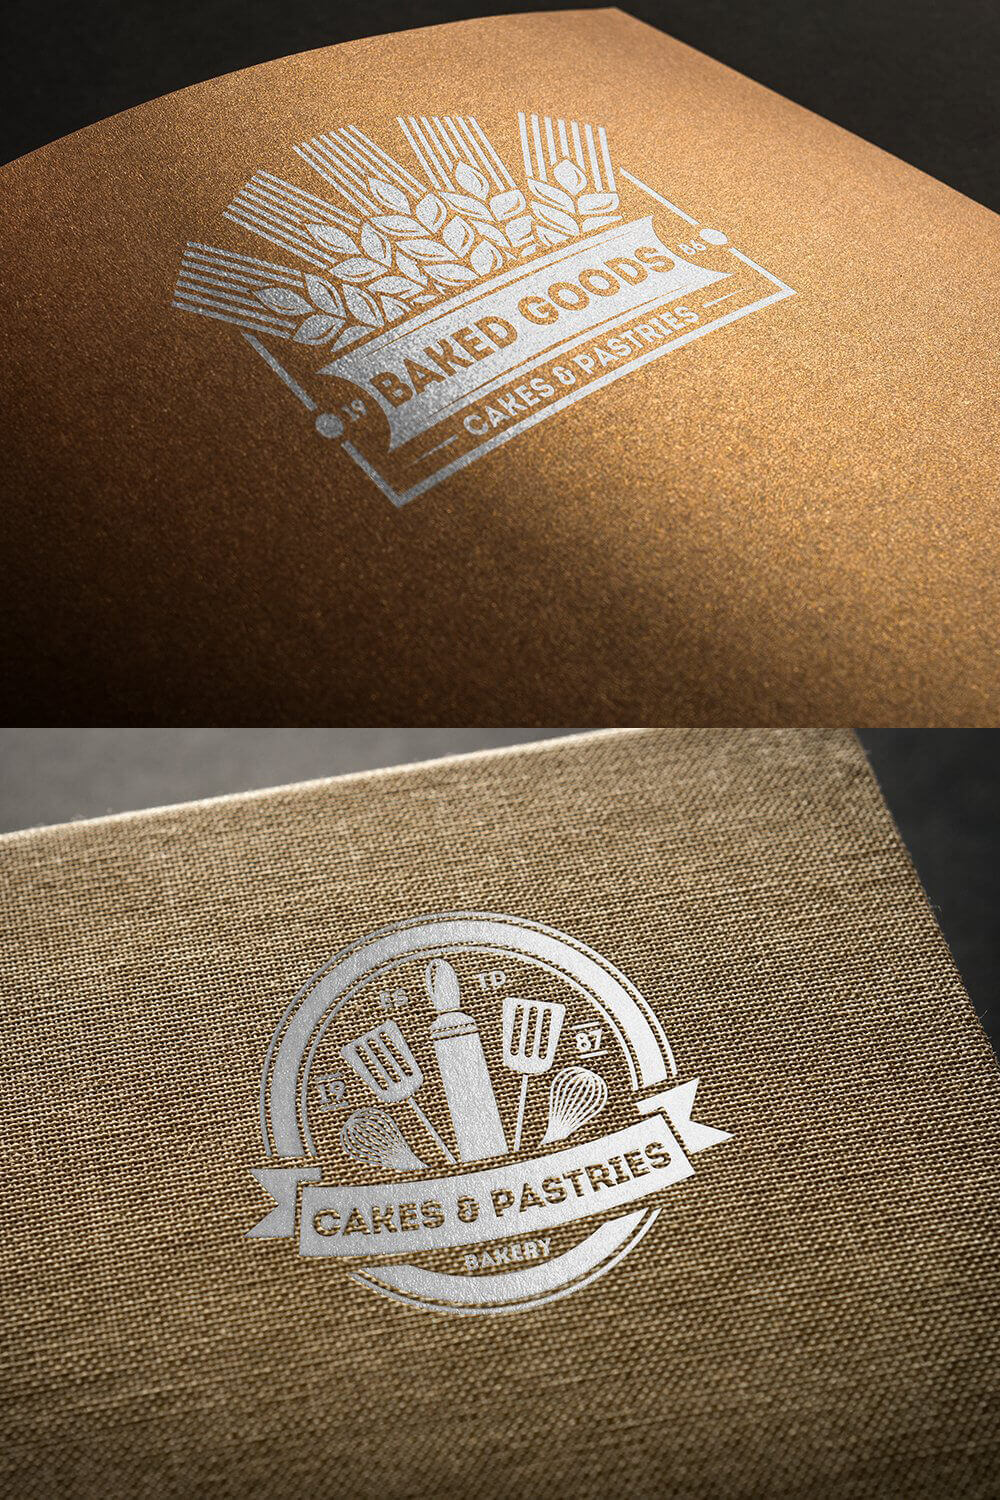 Silver "Baked Goods" logo on brown paper, "Cakes & Pastries" logo on brown burlap.